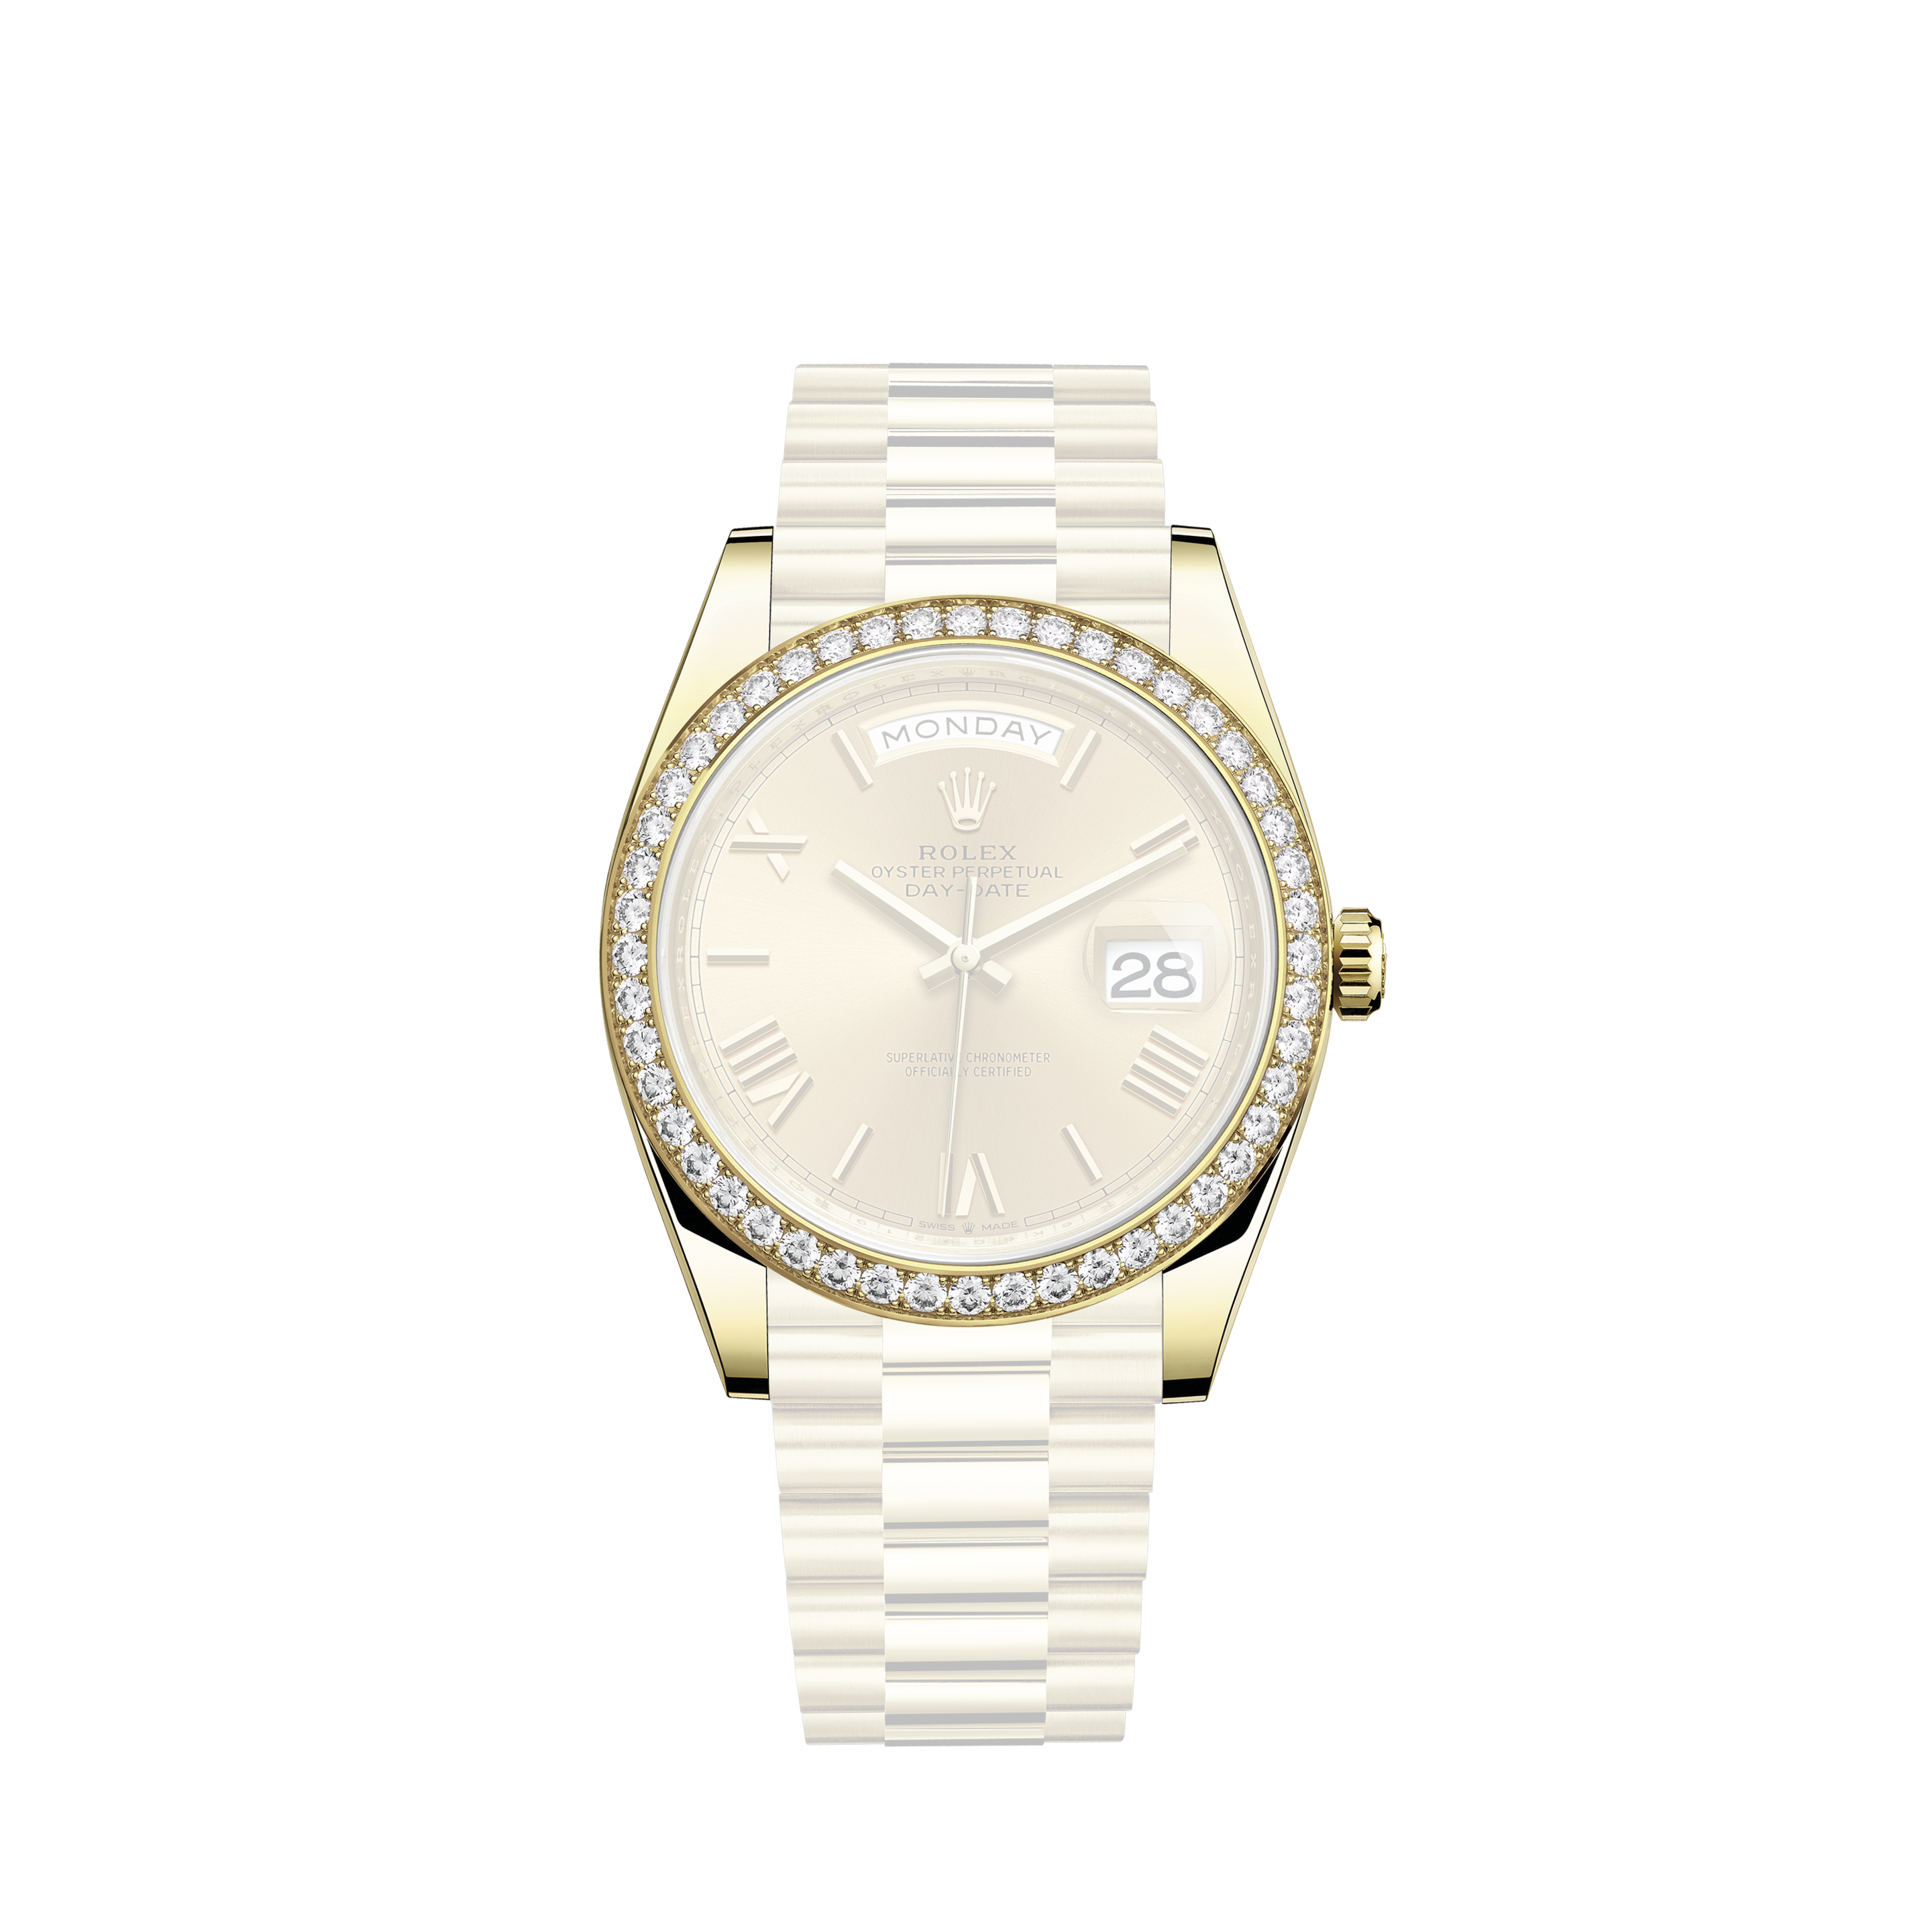 Rolex 8382 Honeycomb Dial WatchRolex 86285 Datejust Pearlmaster 39 Pave Diamond Dial